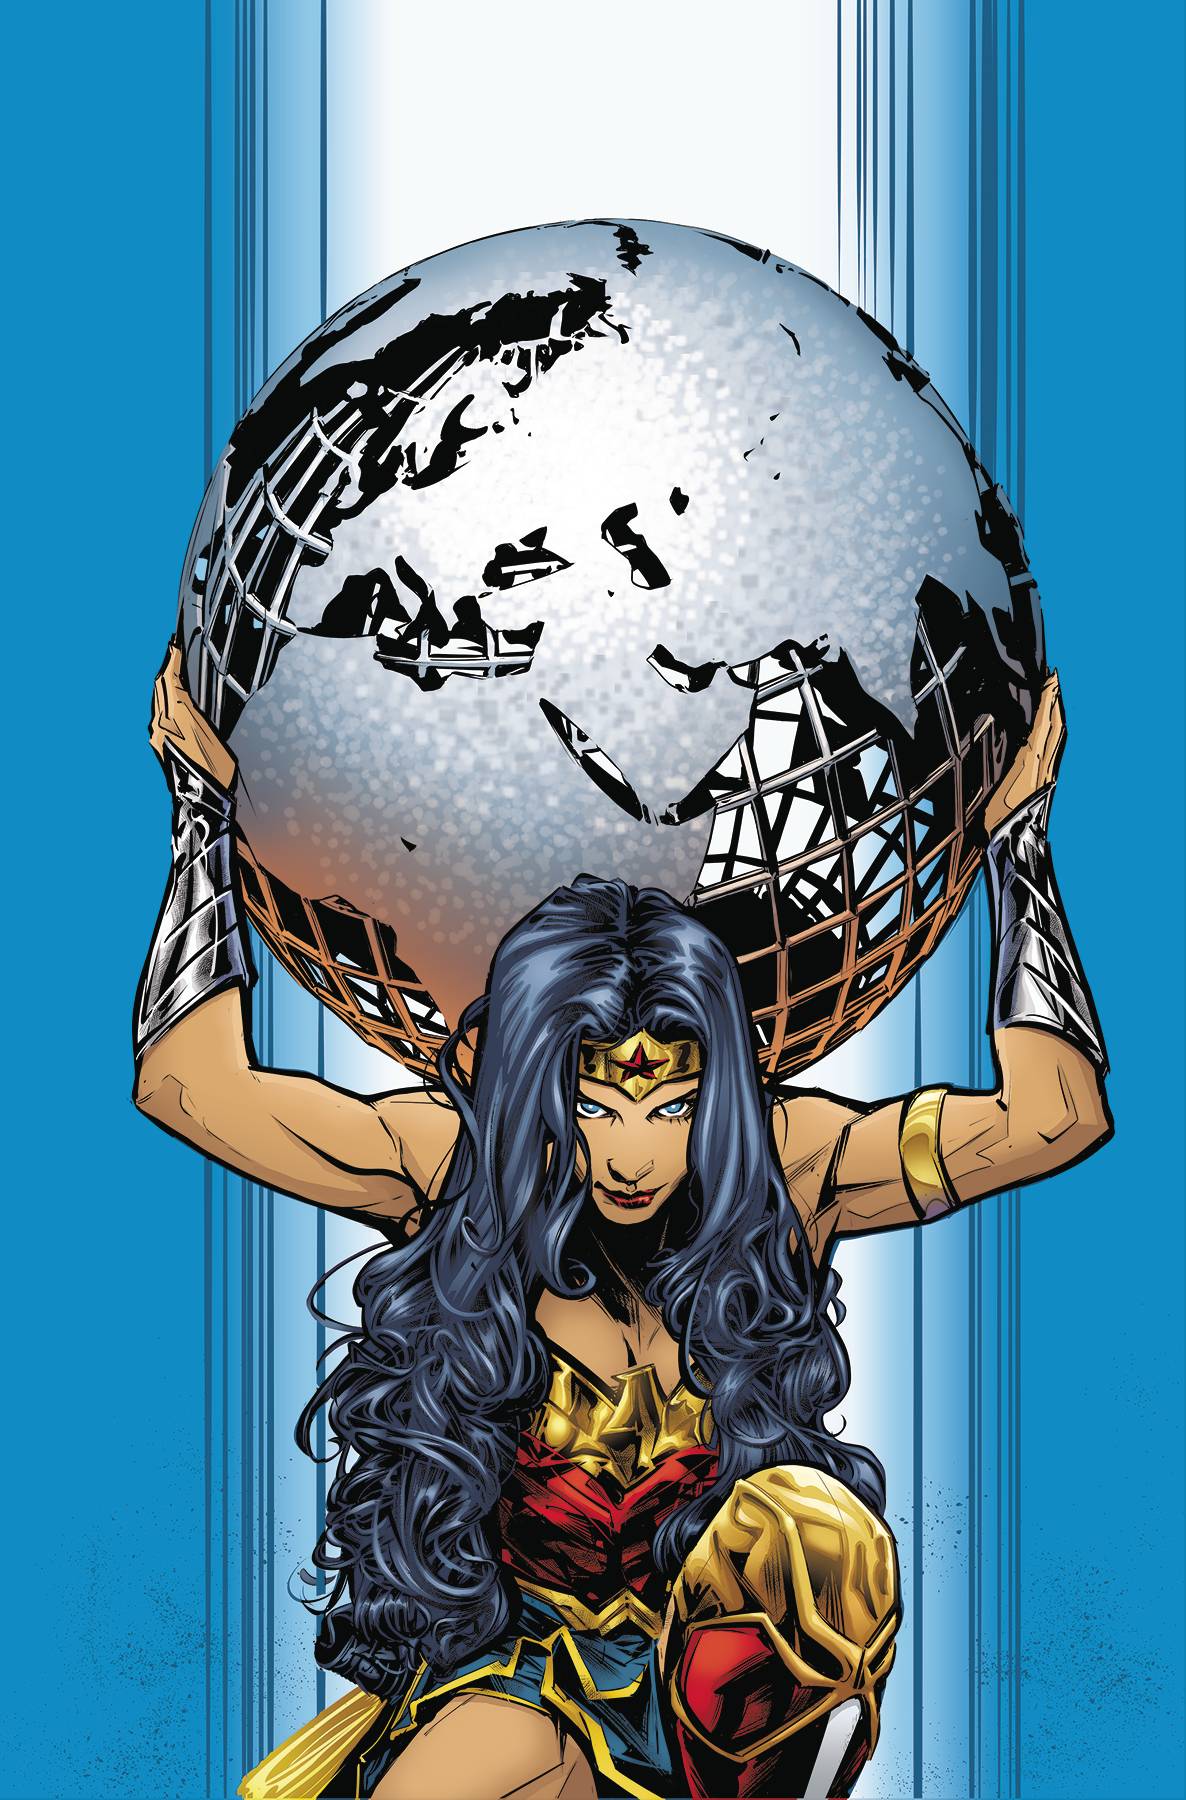 Wonder Woman #750 The Deluxe Edition